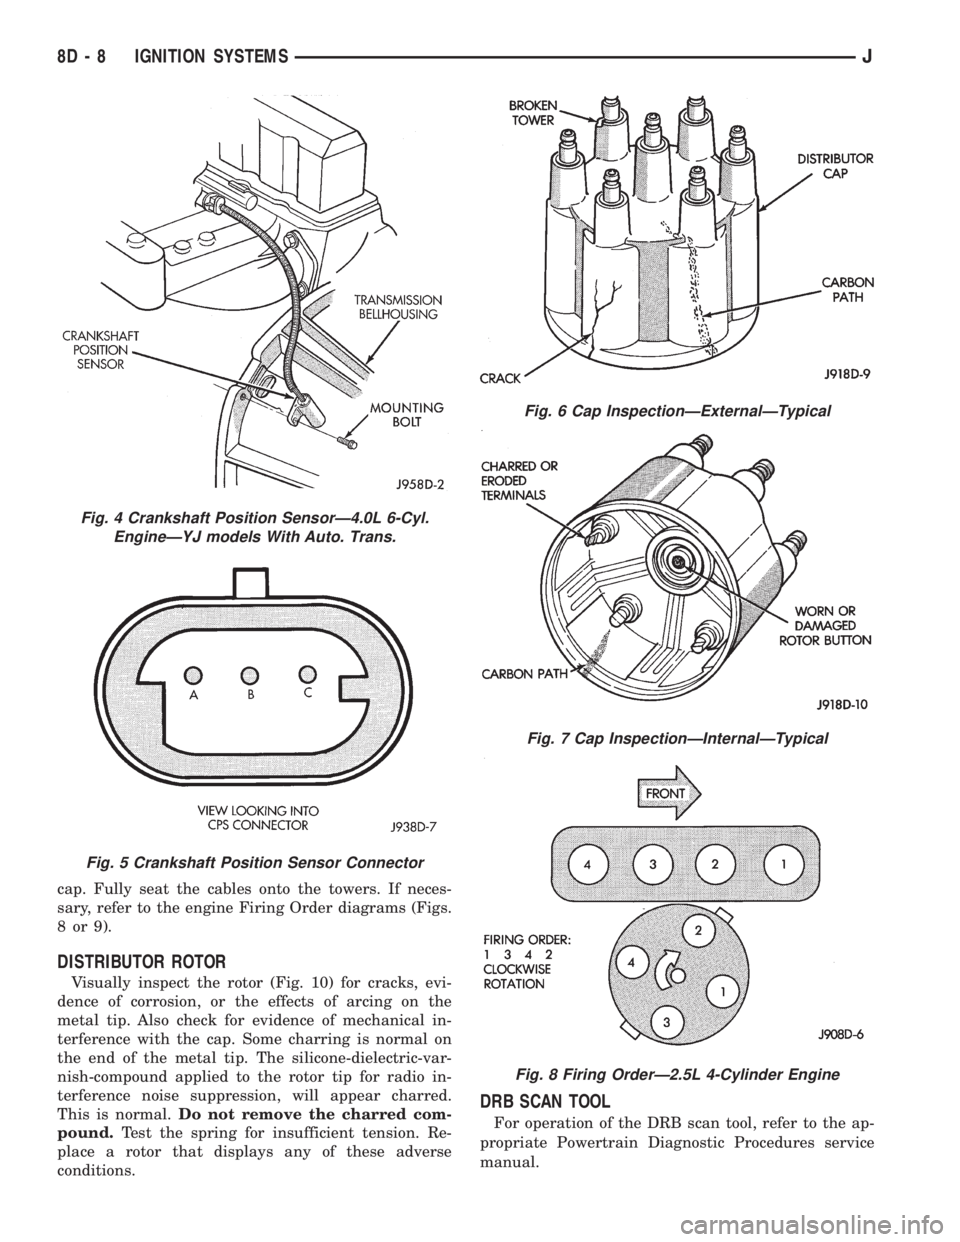 JEEP CHEROKEE 1995  Service Repair Manual cap. Fully seat the cables onto the towers. If neces-
sary, refer to the engine Firing Order diagrams (Figs.
8or9).
DISTRIBUTOR ROTOR
Visually inspect the rotor (Fig. 10) for cracks, evi-
dence of cor